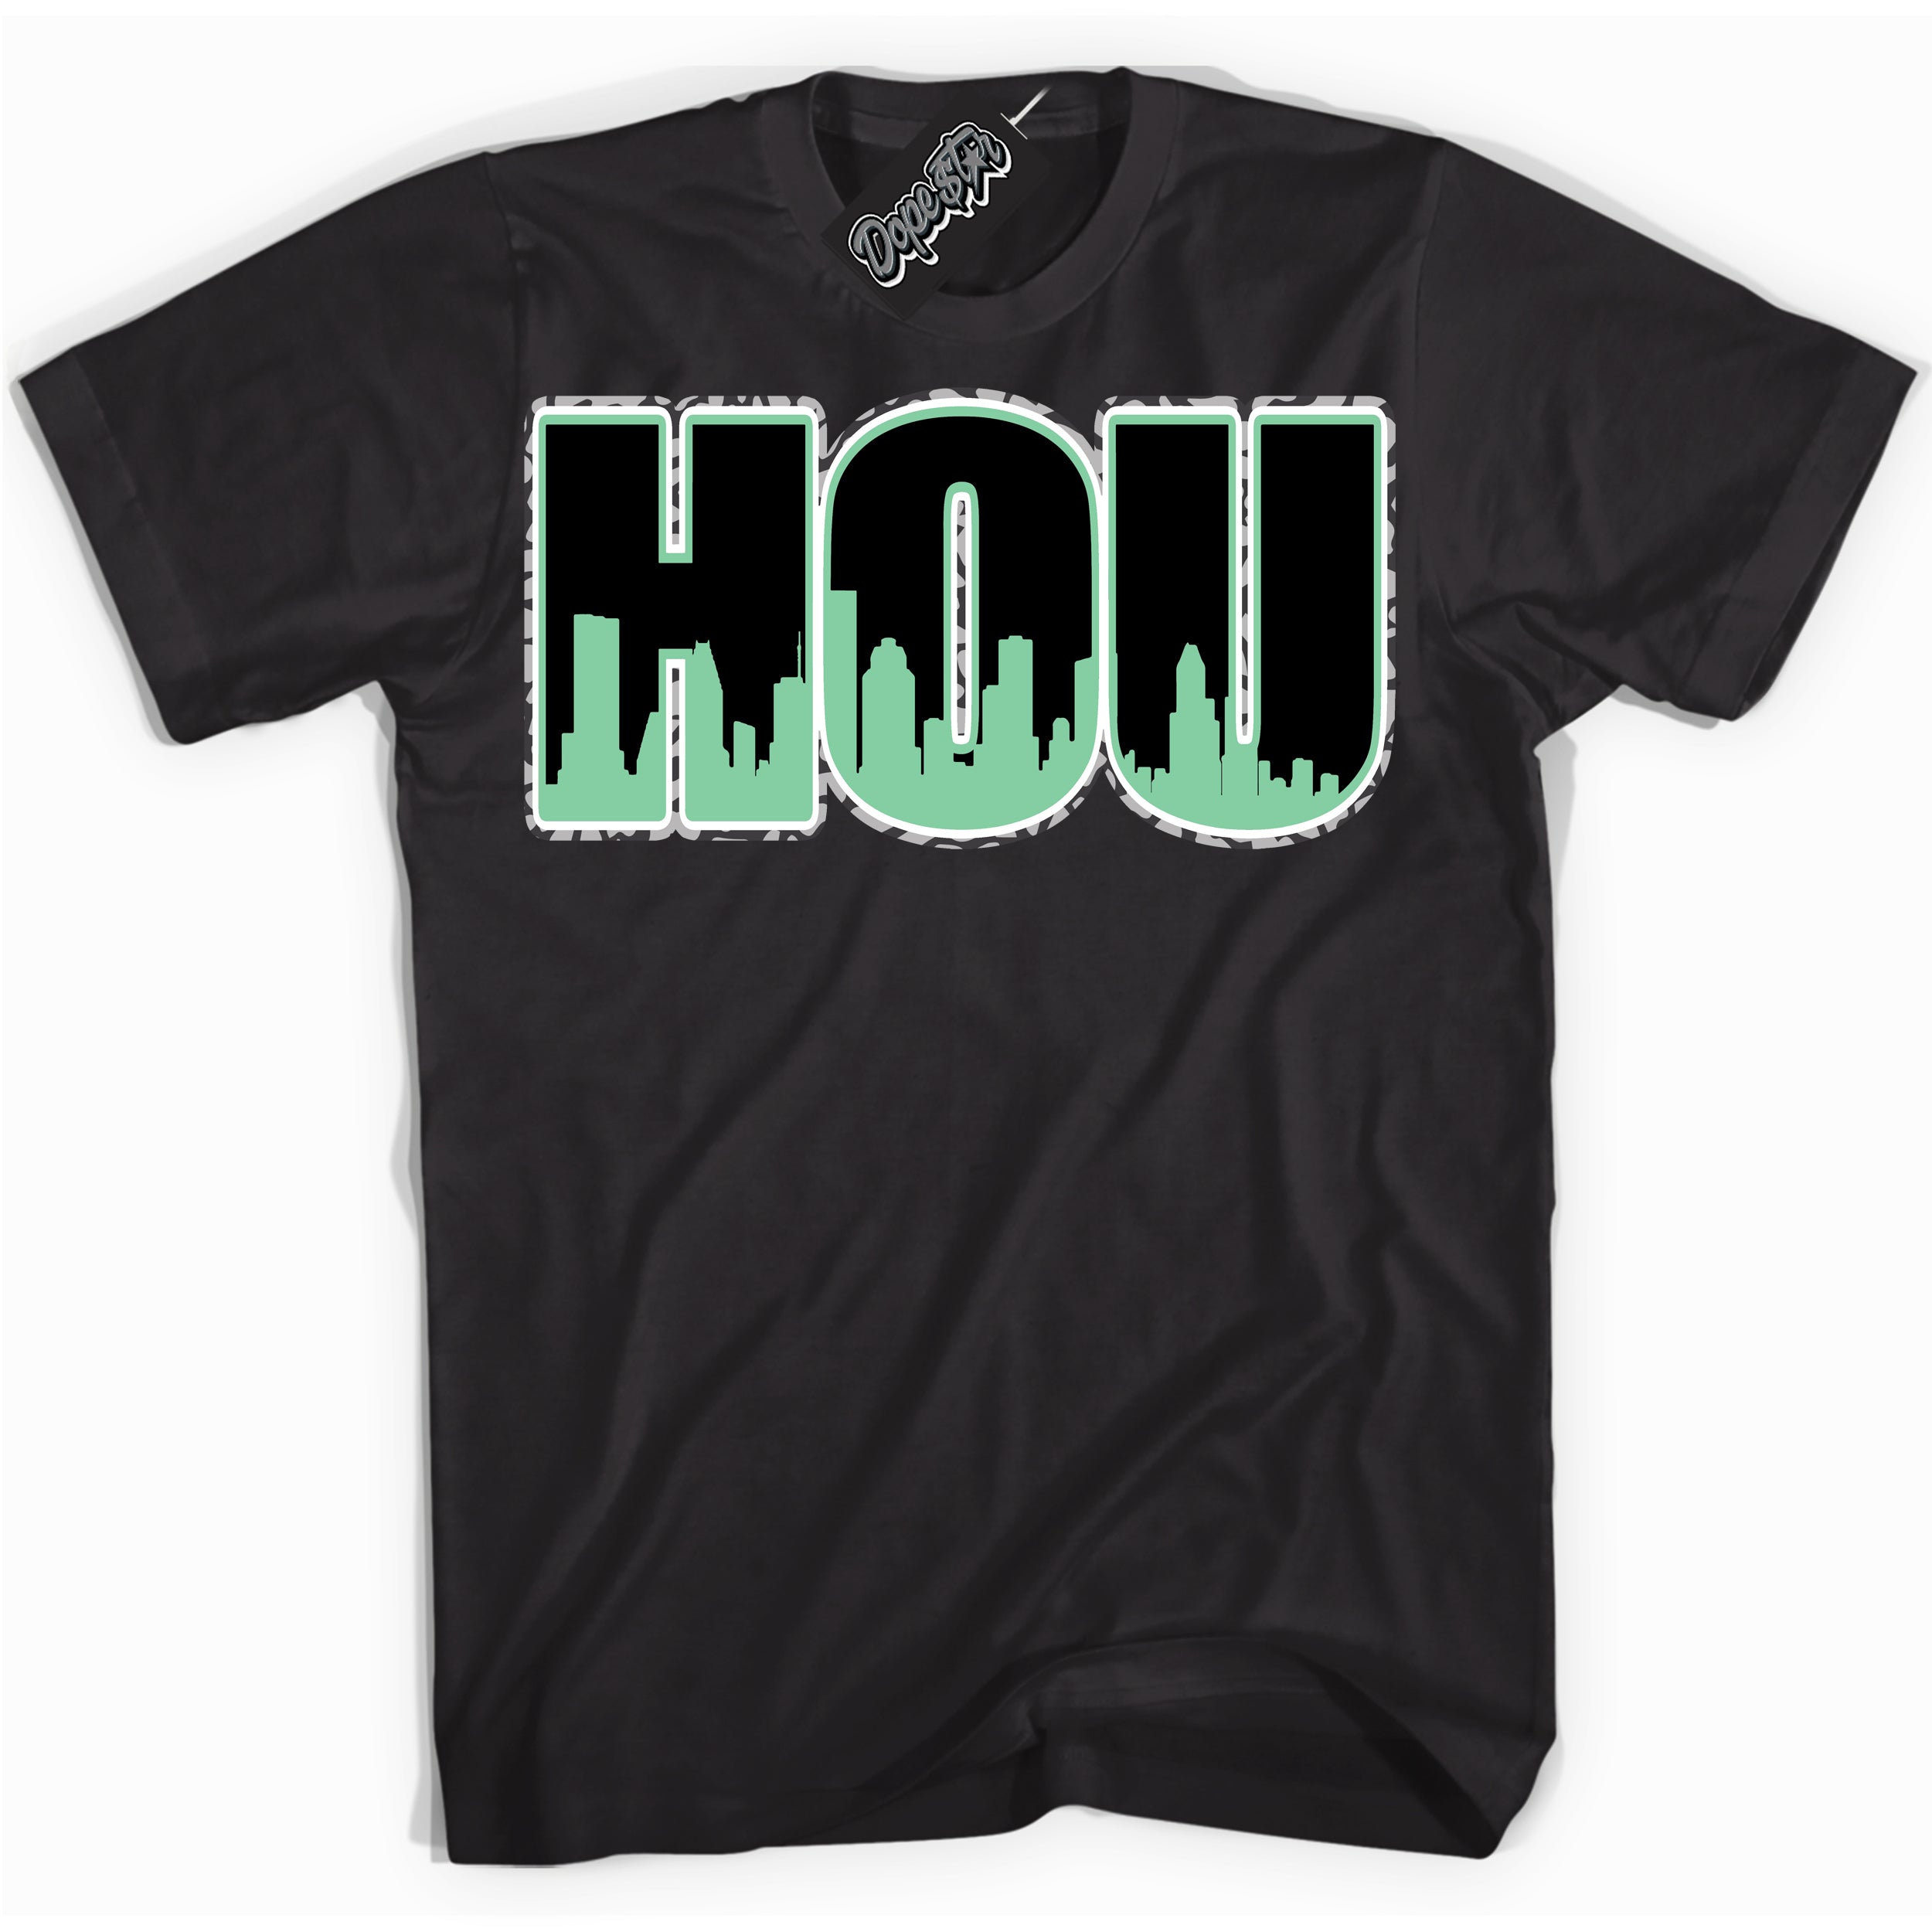 Cool Black graphic tee with “ Houston ” design, that perfectly matches Green Glow 3s sneakers 